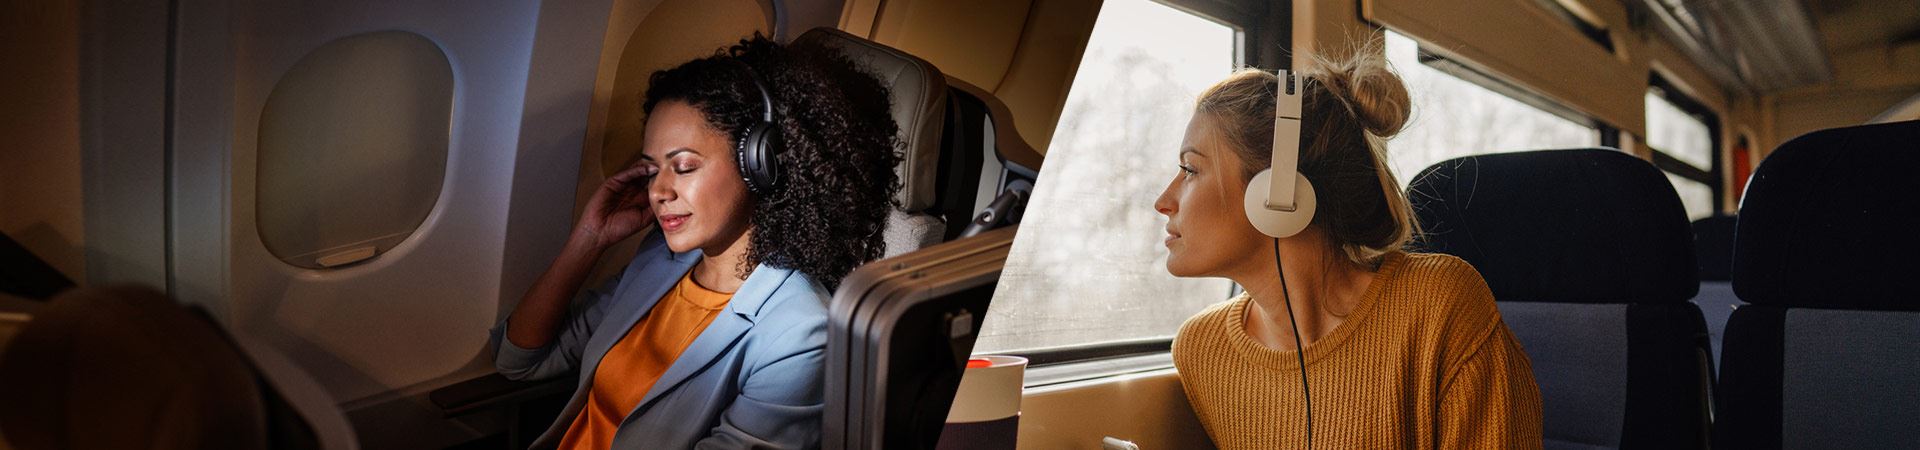 On the left, a photograph of a woman sitting comfortably inside an airplane. On the right, a photograph of another woman sitting inside a train, looking out the window. Both of them are using headphones. The ambiance on the plane and train is calm, with no other people visible. 